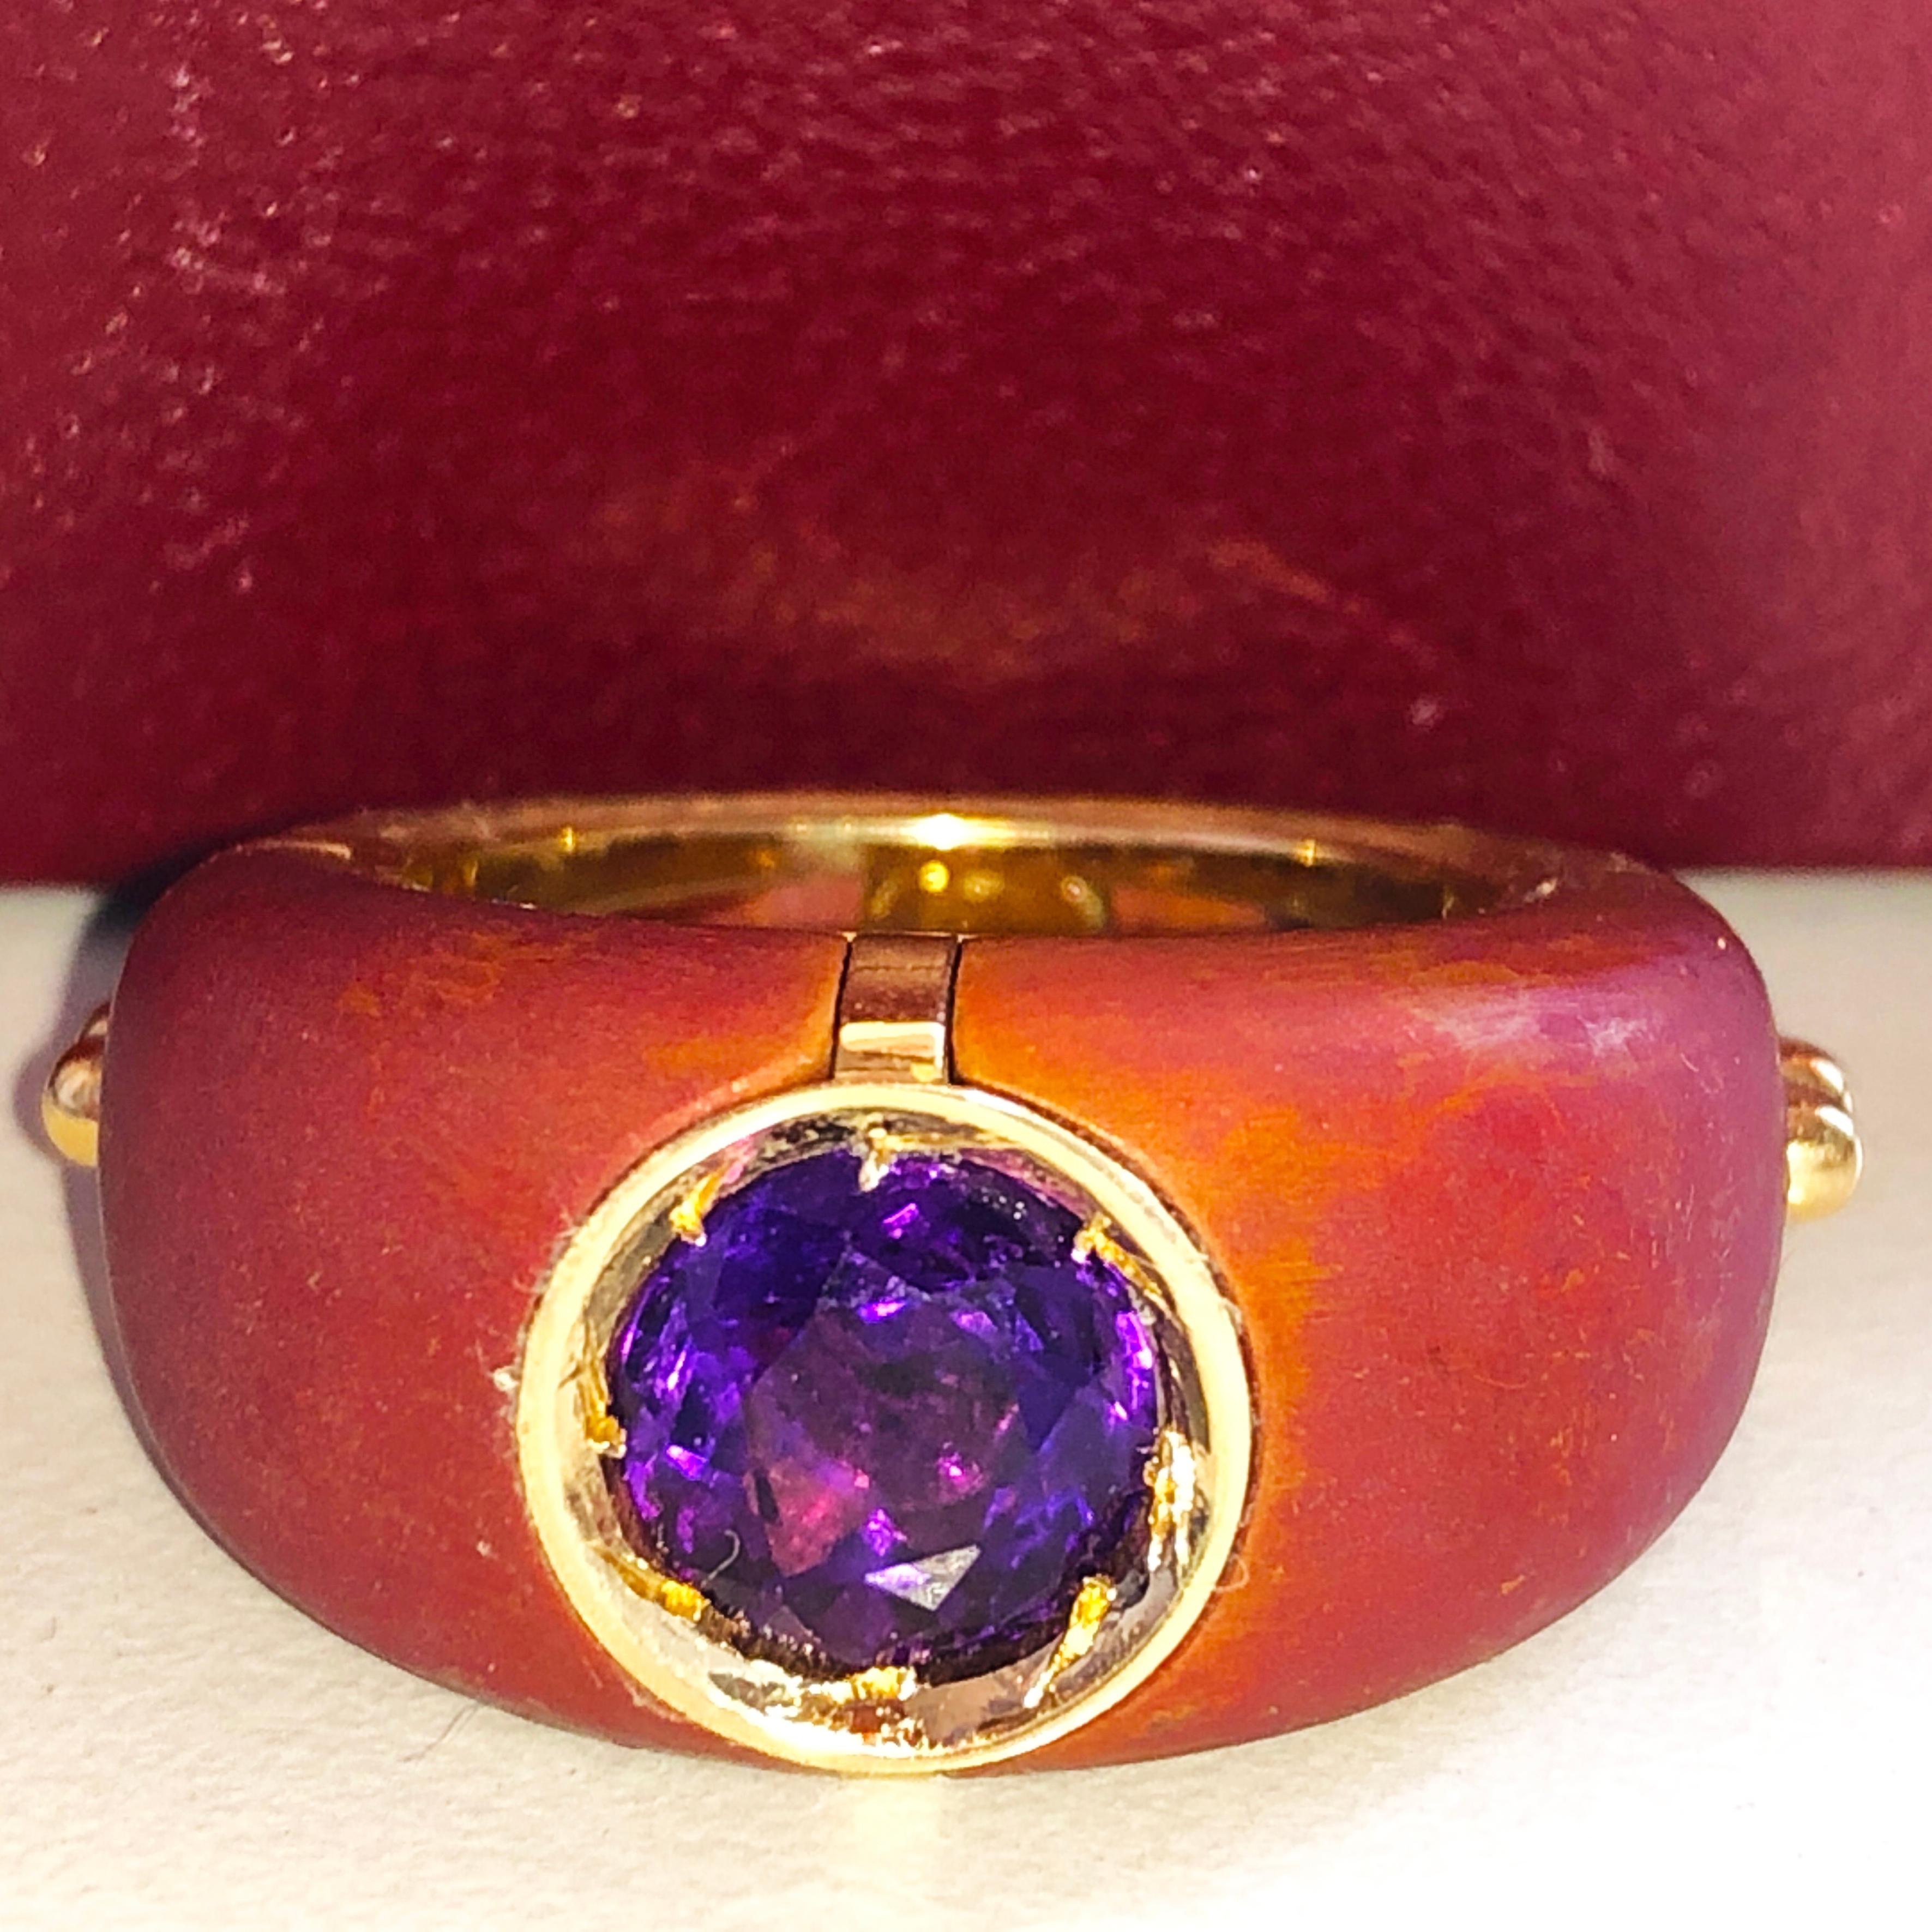 One-of-a-kind Contemporary Cocktail Ring Featuring a 1.83 Carat Natural Brilliant Cut Amethyst in an 18K Yellow Gold Red Hand Oxidized Brass, similar to an Antique Chinese Lacquer Finish, Setting.
The purple of  Amethyst combined with Gold and Red